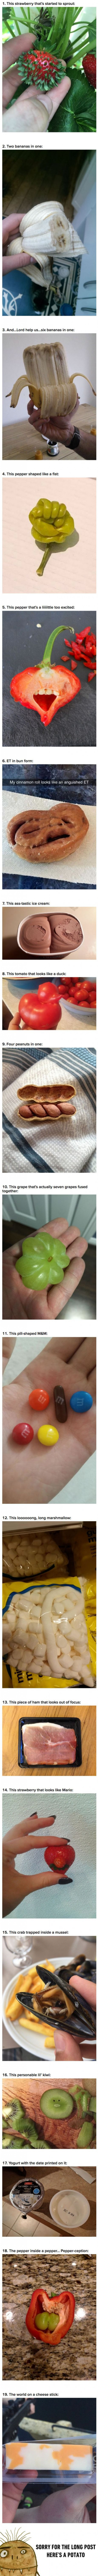 19 Pictures Of Food That Will Make You Say WTF